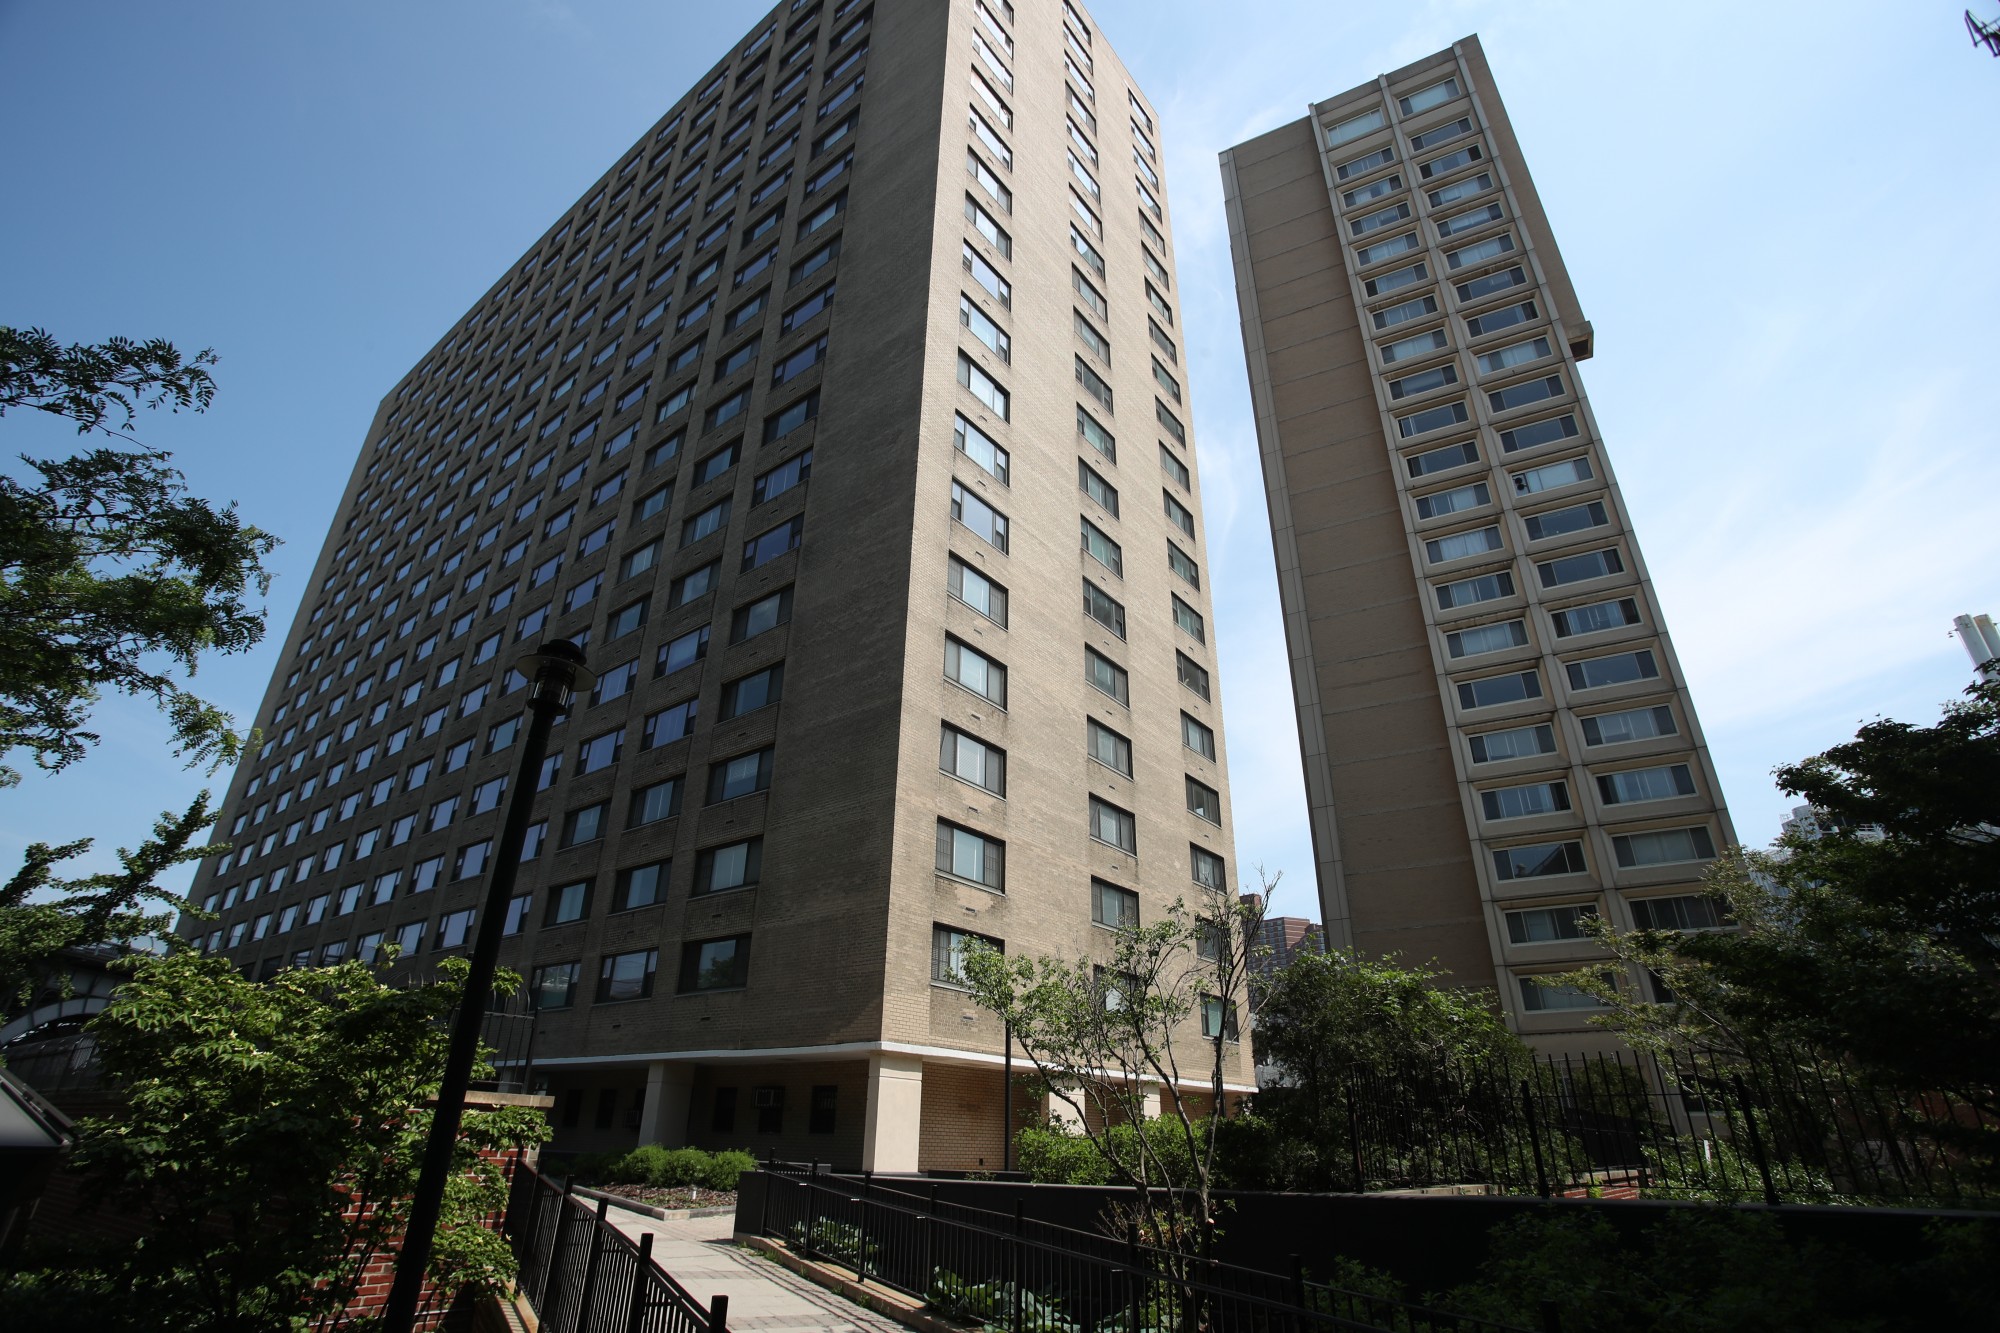 560 Riverside Drive photographed from street